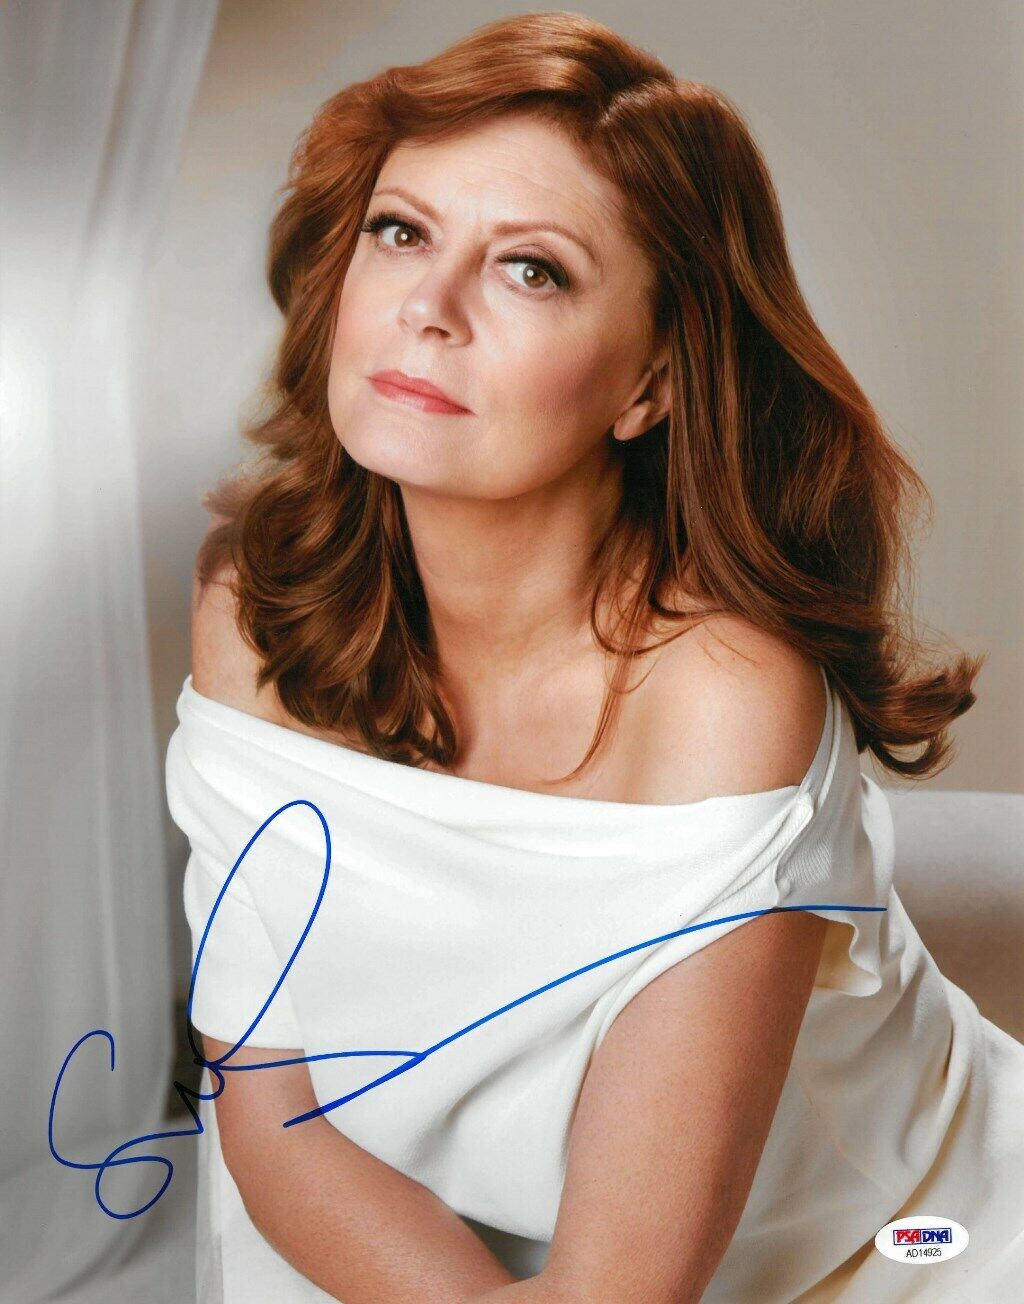 Susan Sarandon Signed Authentic Autographed 11x14 Photo Poster painting PSA/DNA #AD14925